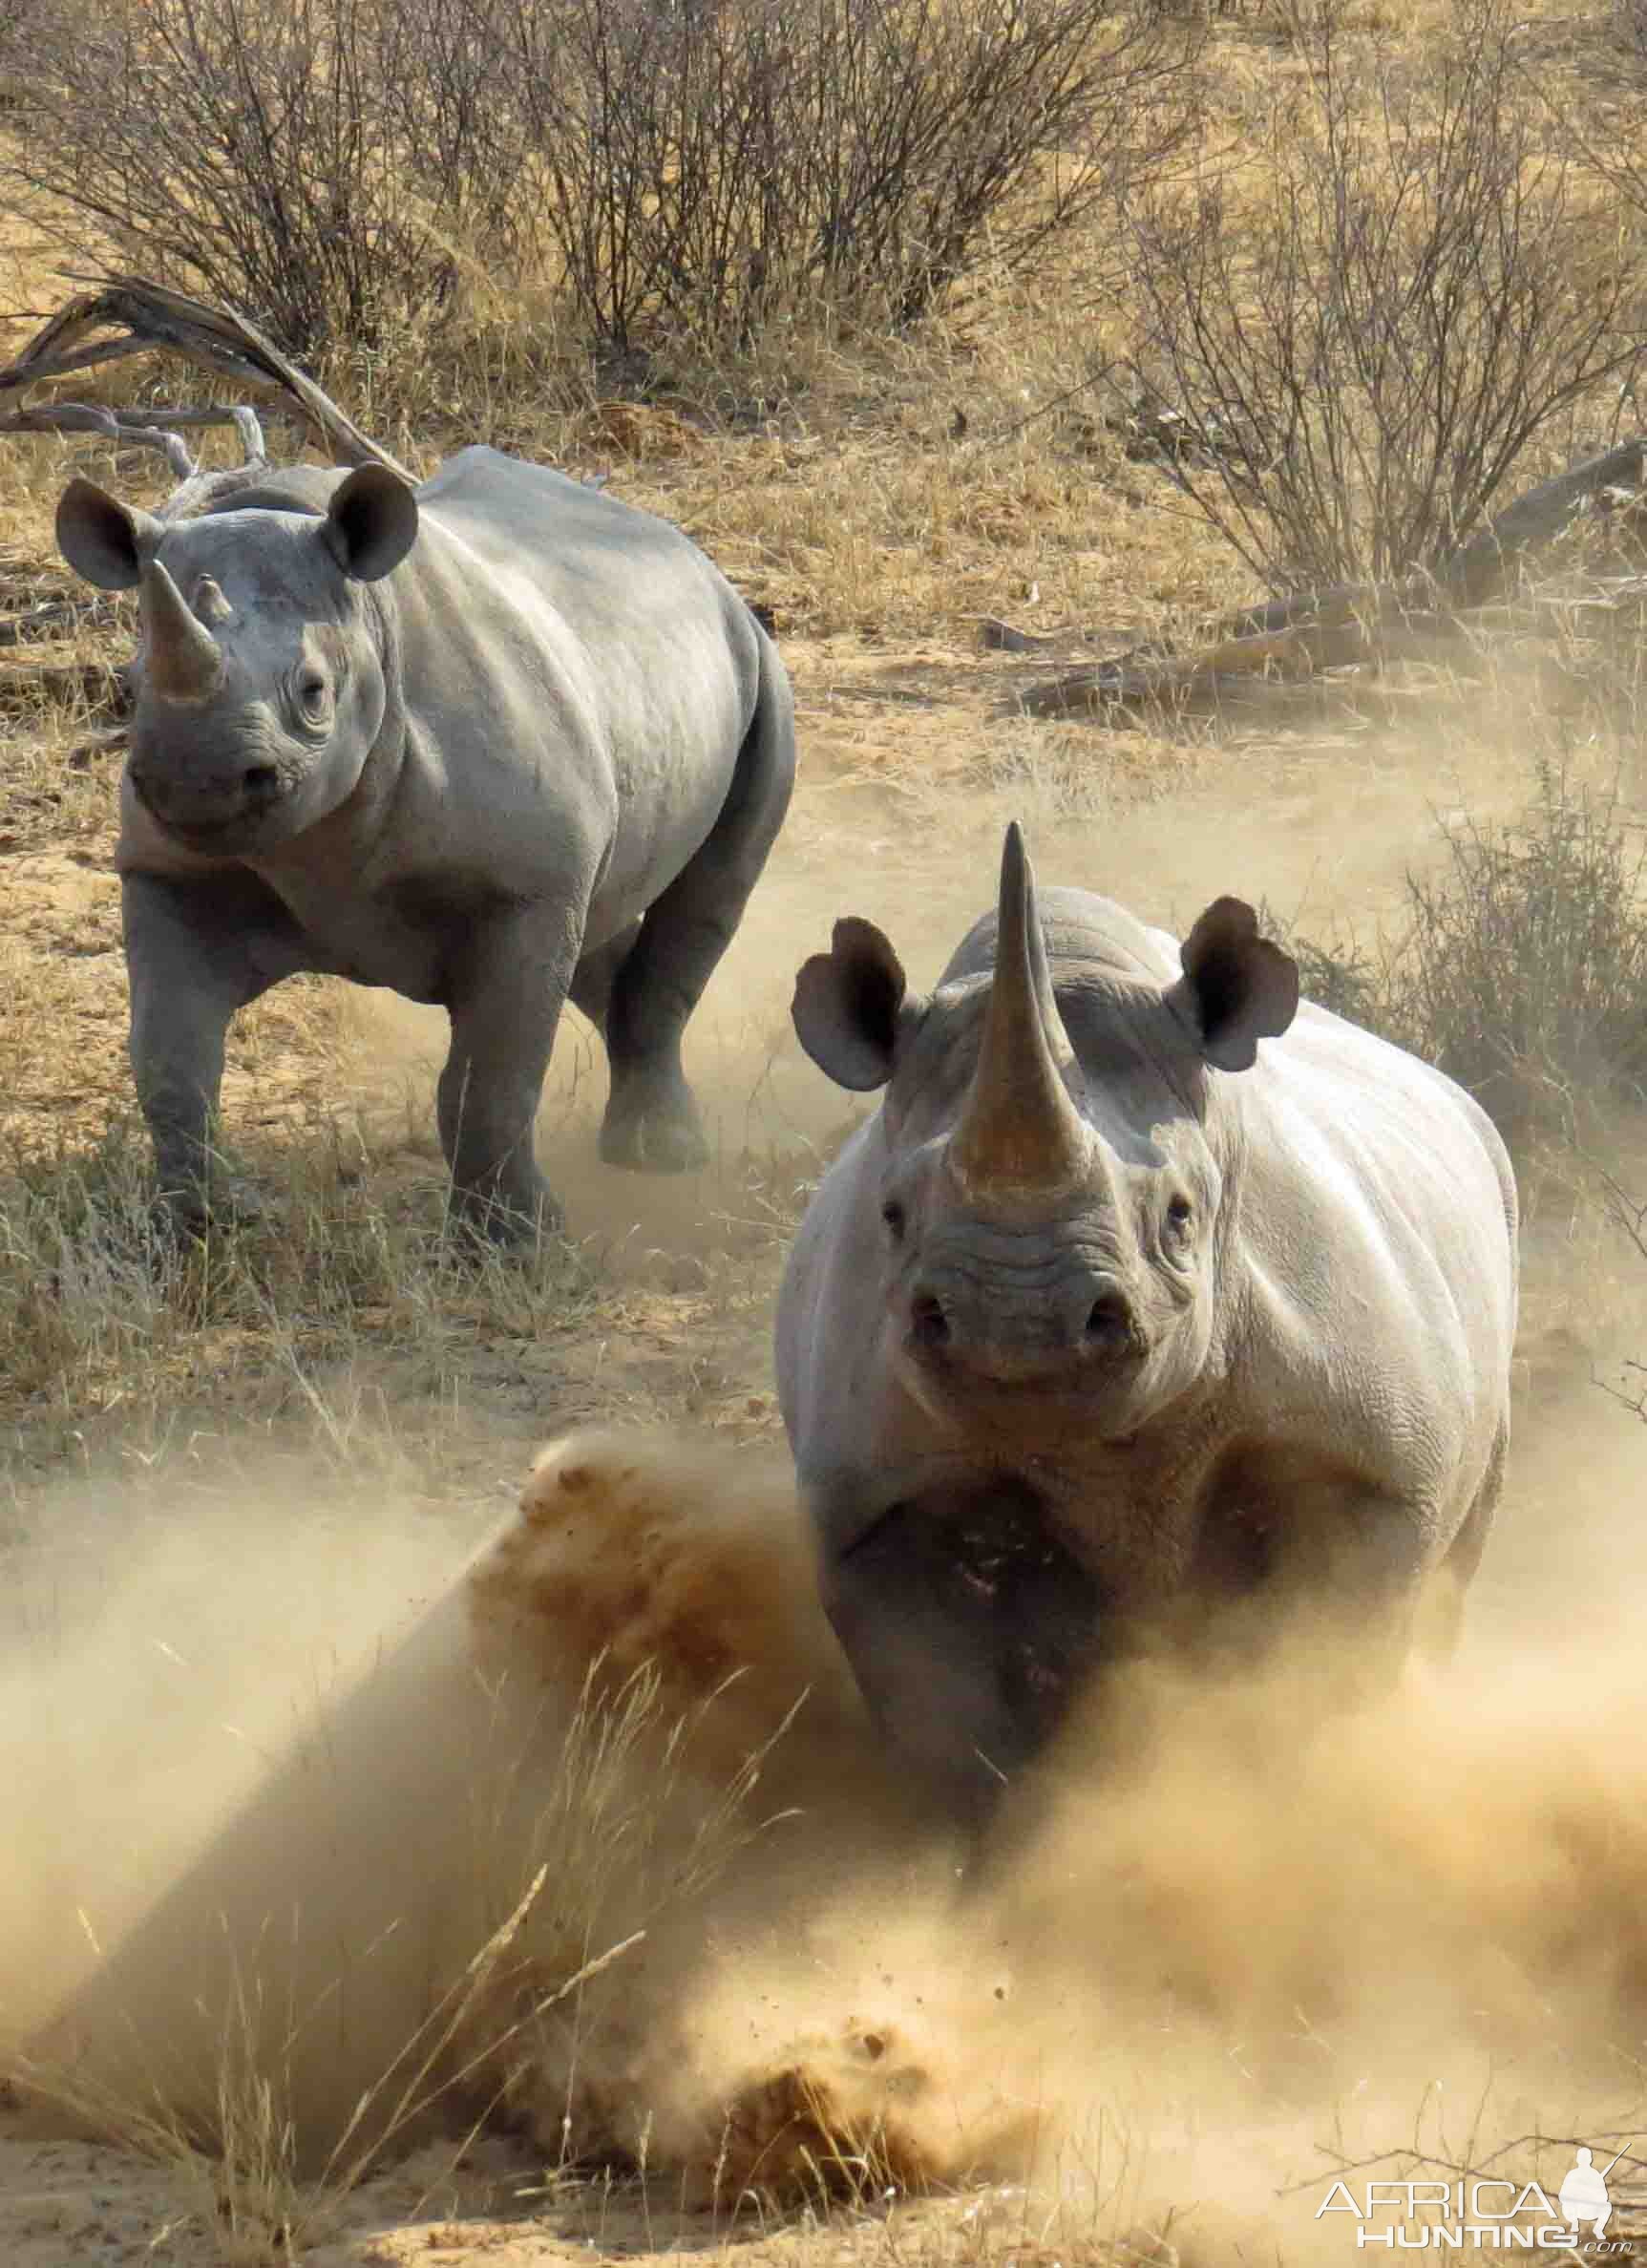 Normal behavior for a black rhino, ie charge and ask questions later.